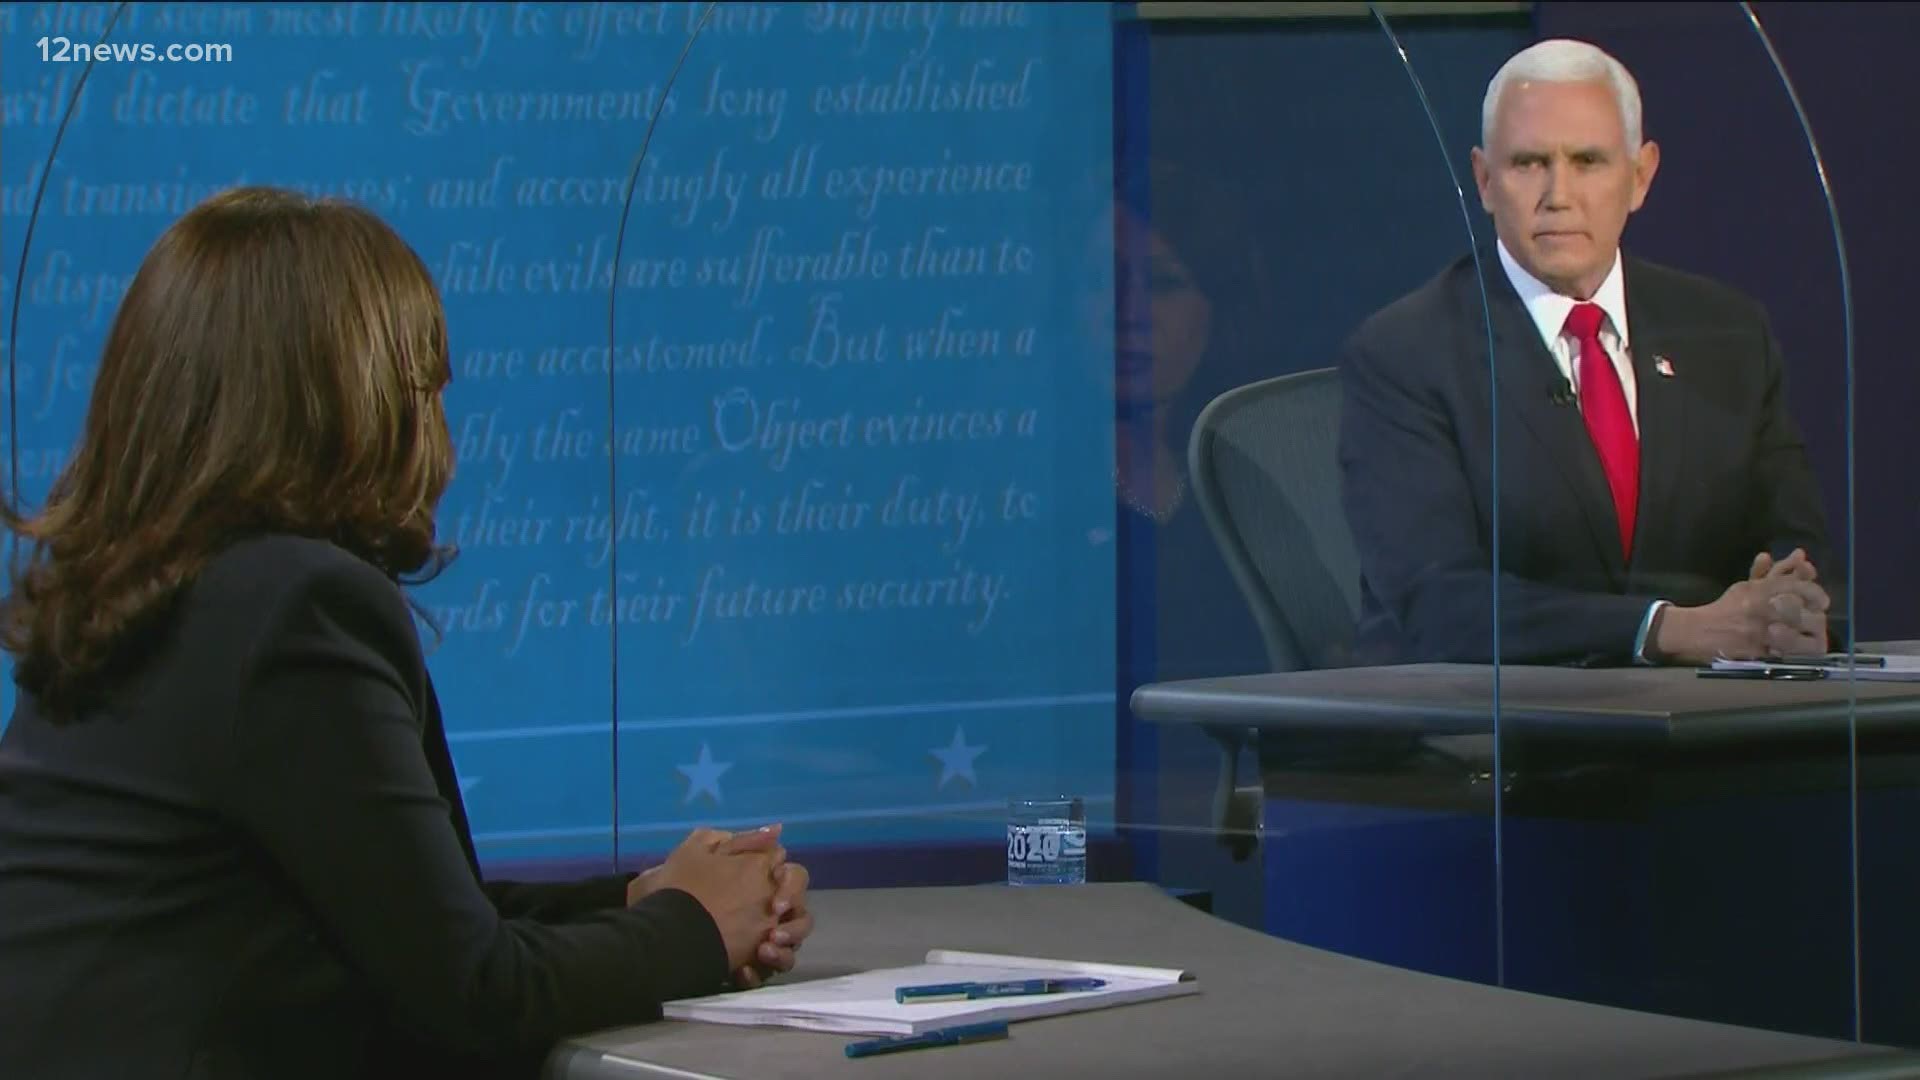 While much of the discussion is about what the candidates said, a body language expert believes how Pence and Harris delivered their answers is even more telling.